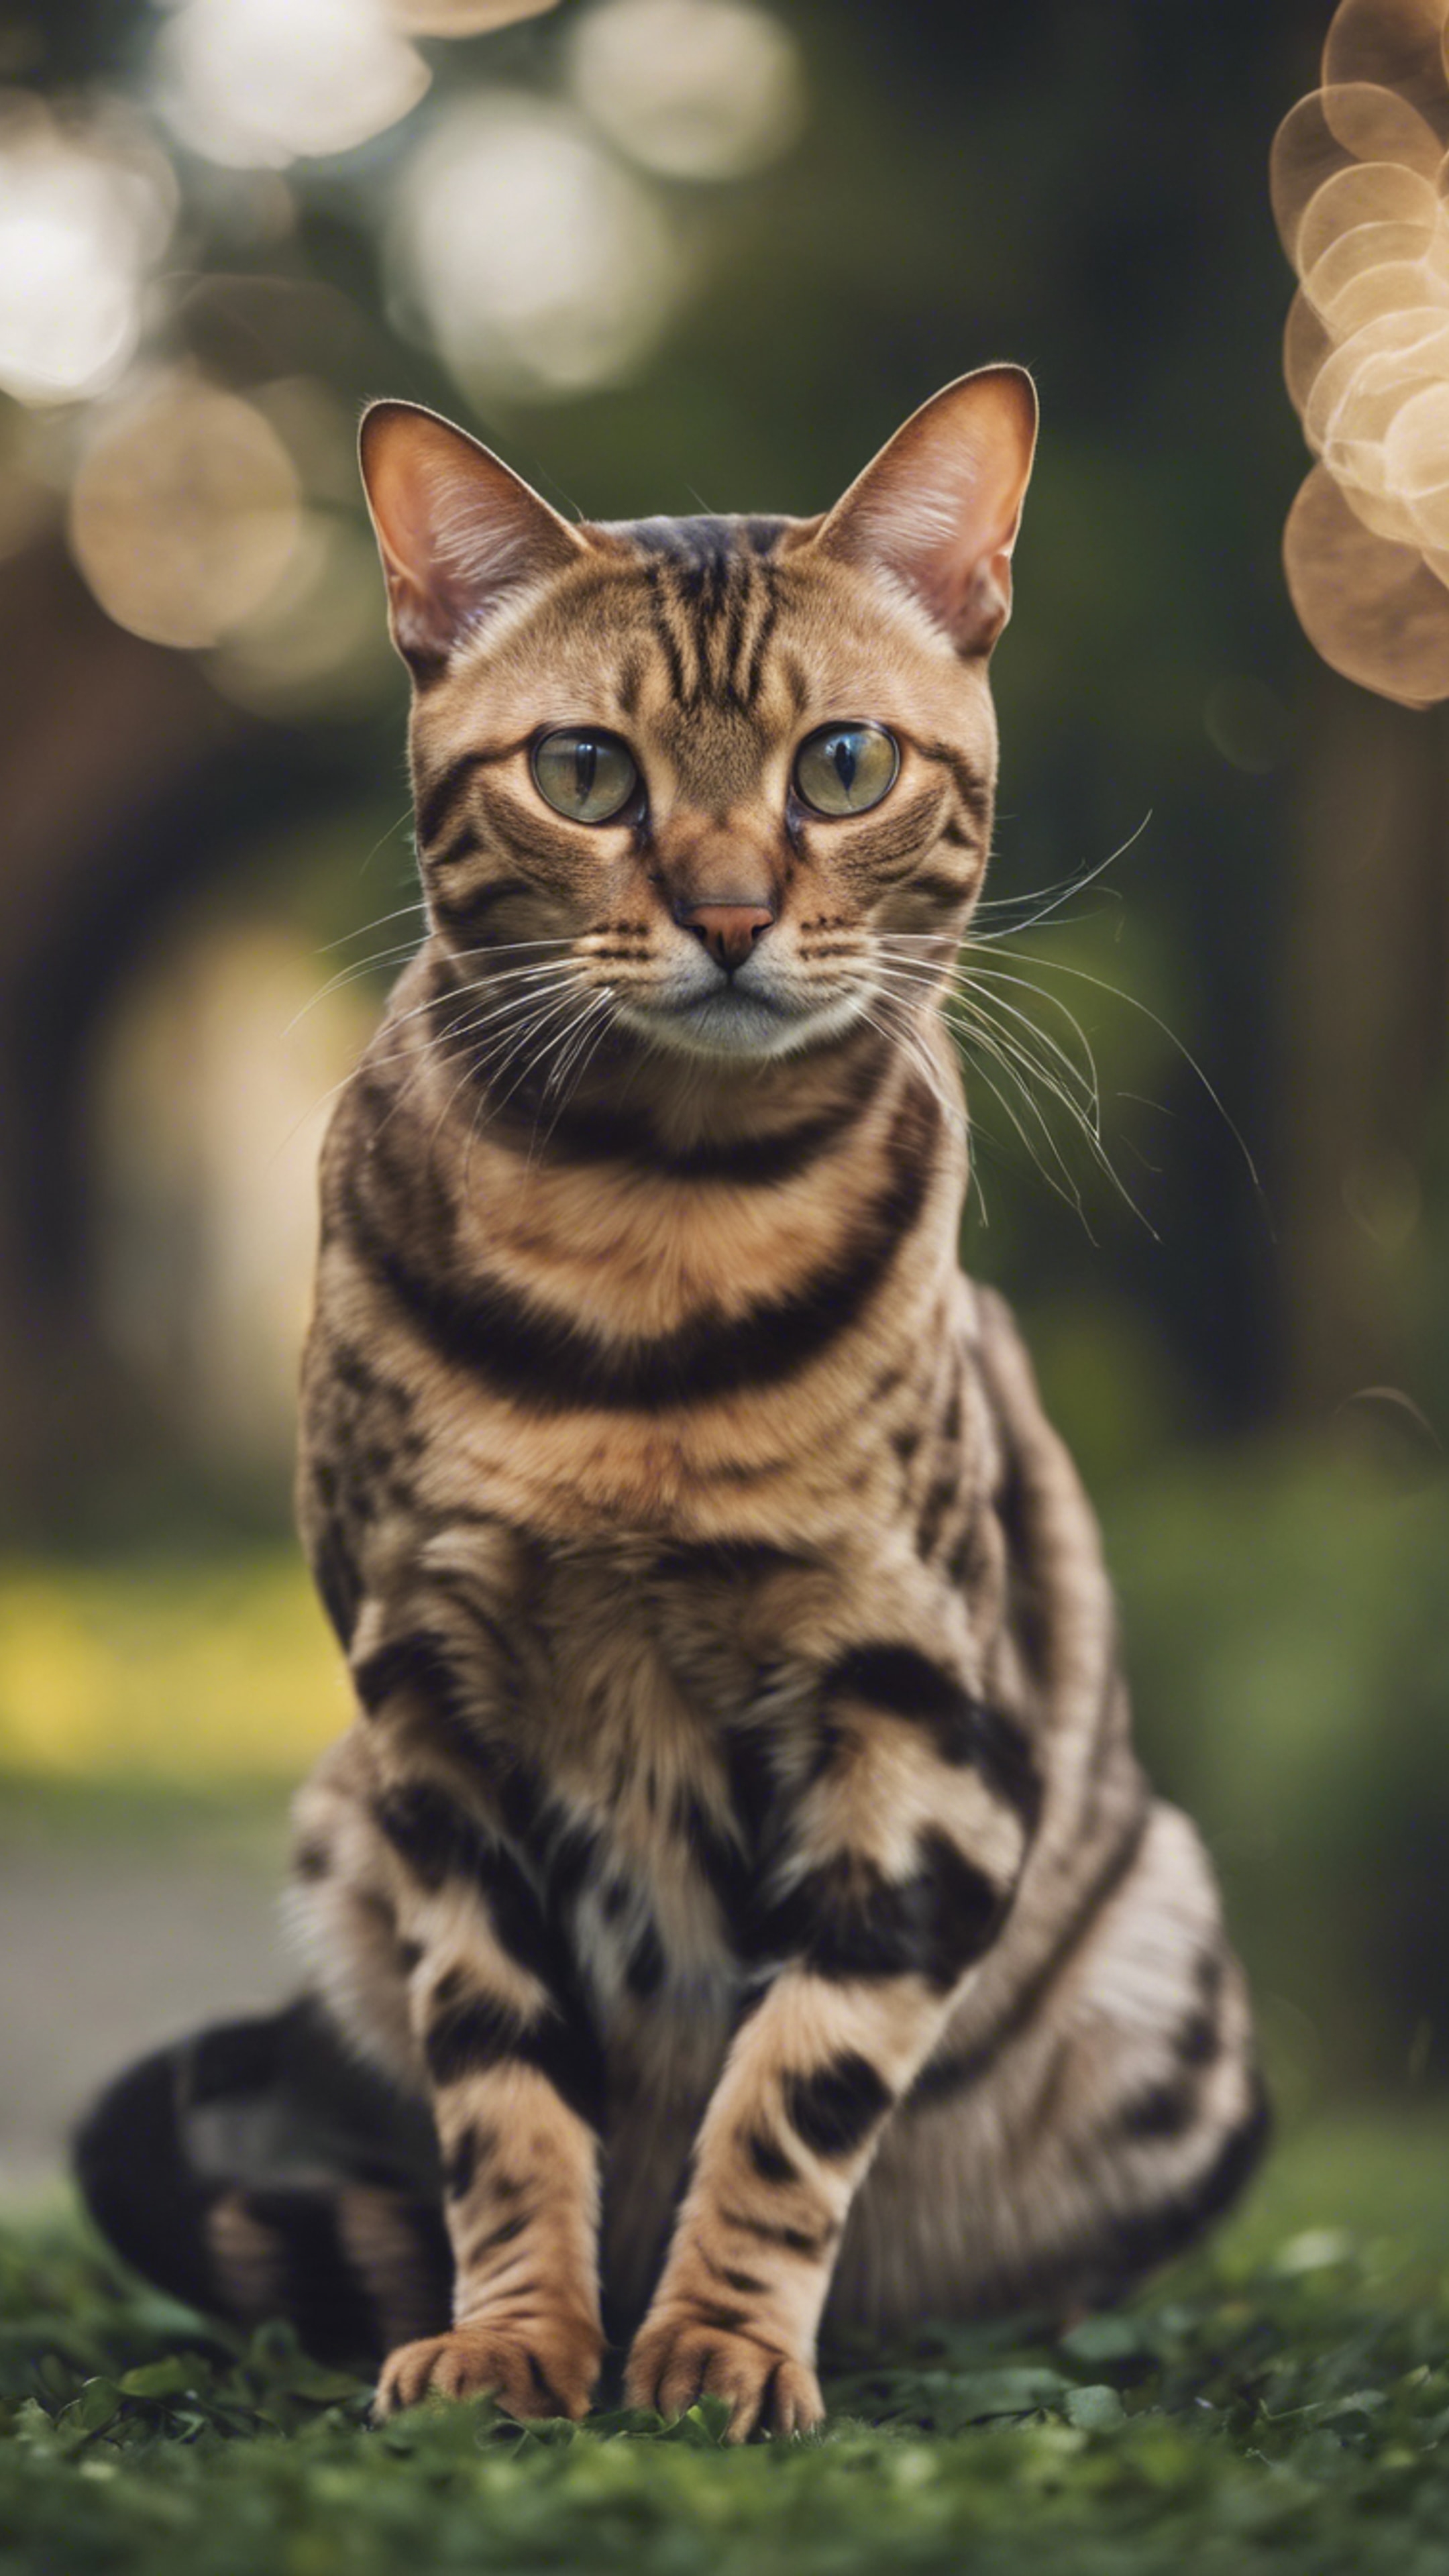 A sleek, aristocratic Bengal cat royally ignoring a mouse scampering by. Tapet[9f7ab84a7c6b485a8696]